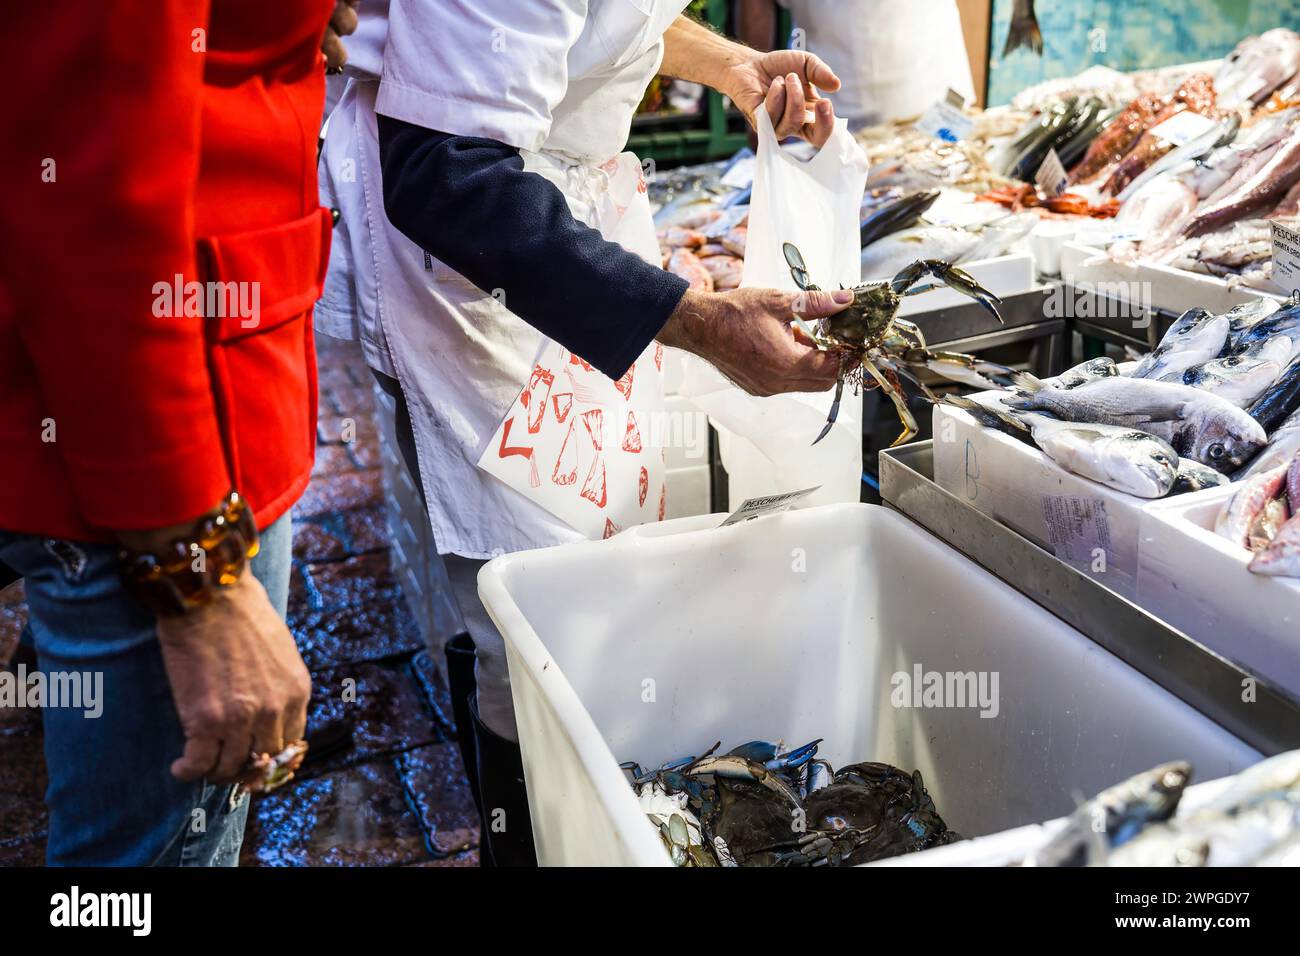 Elegant lady at market to fish counter - The seller is putting callinectes sapidus blue crabs into the bag - blue crabs are american atlantic coasts - Stock Photo